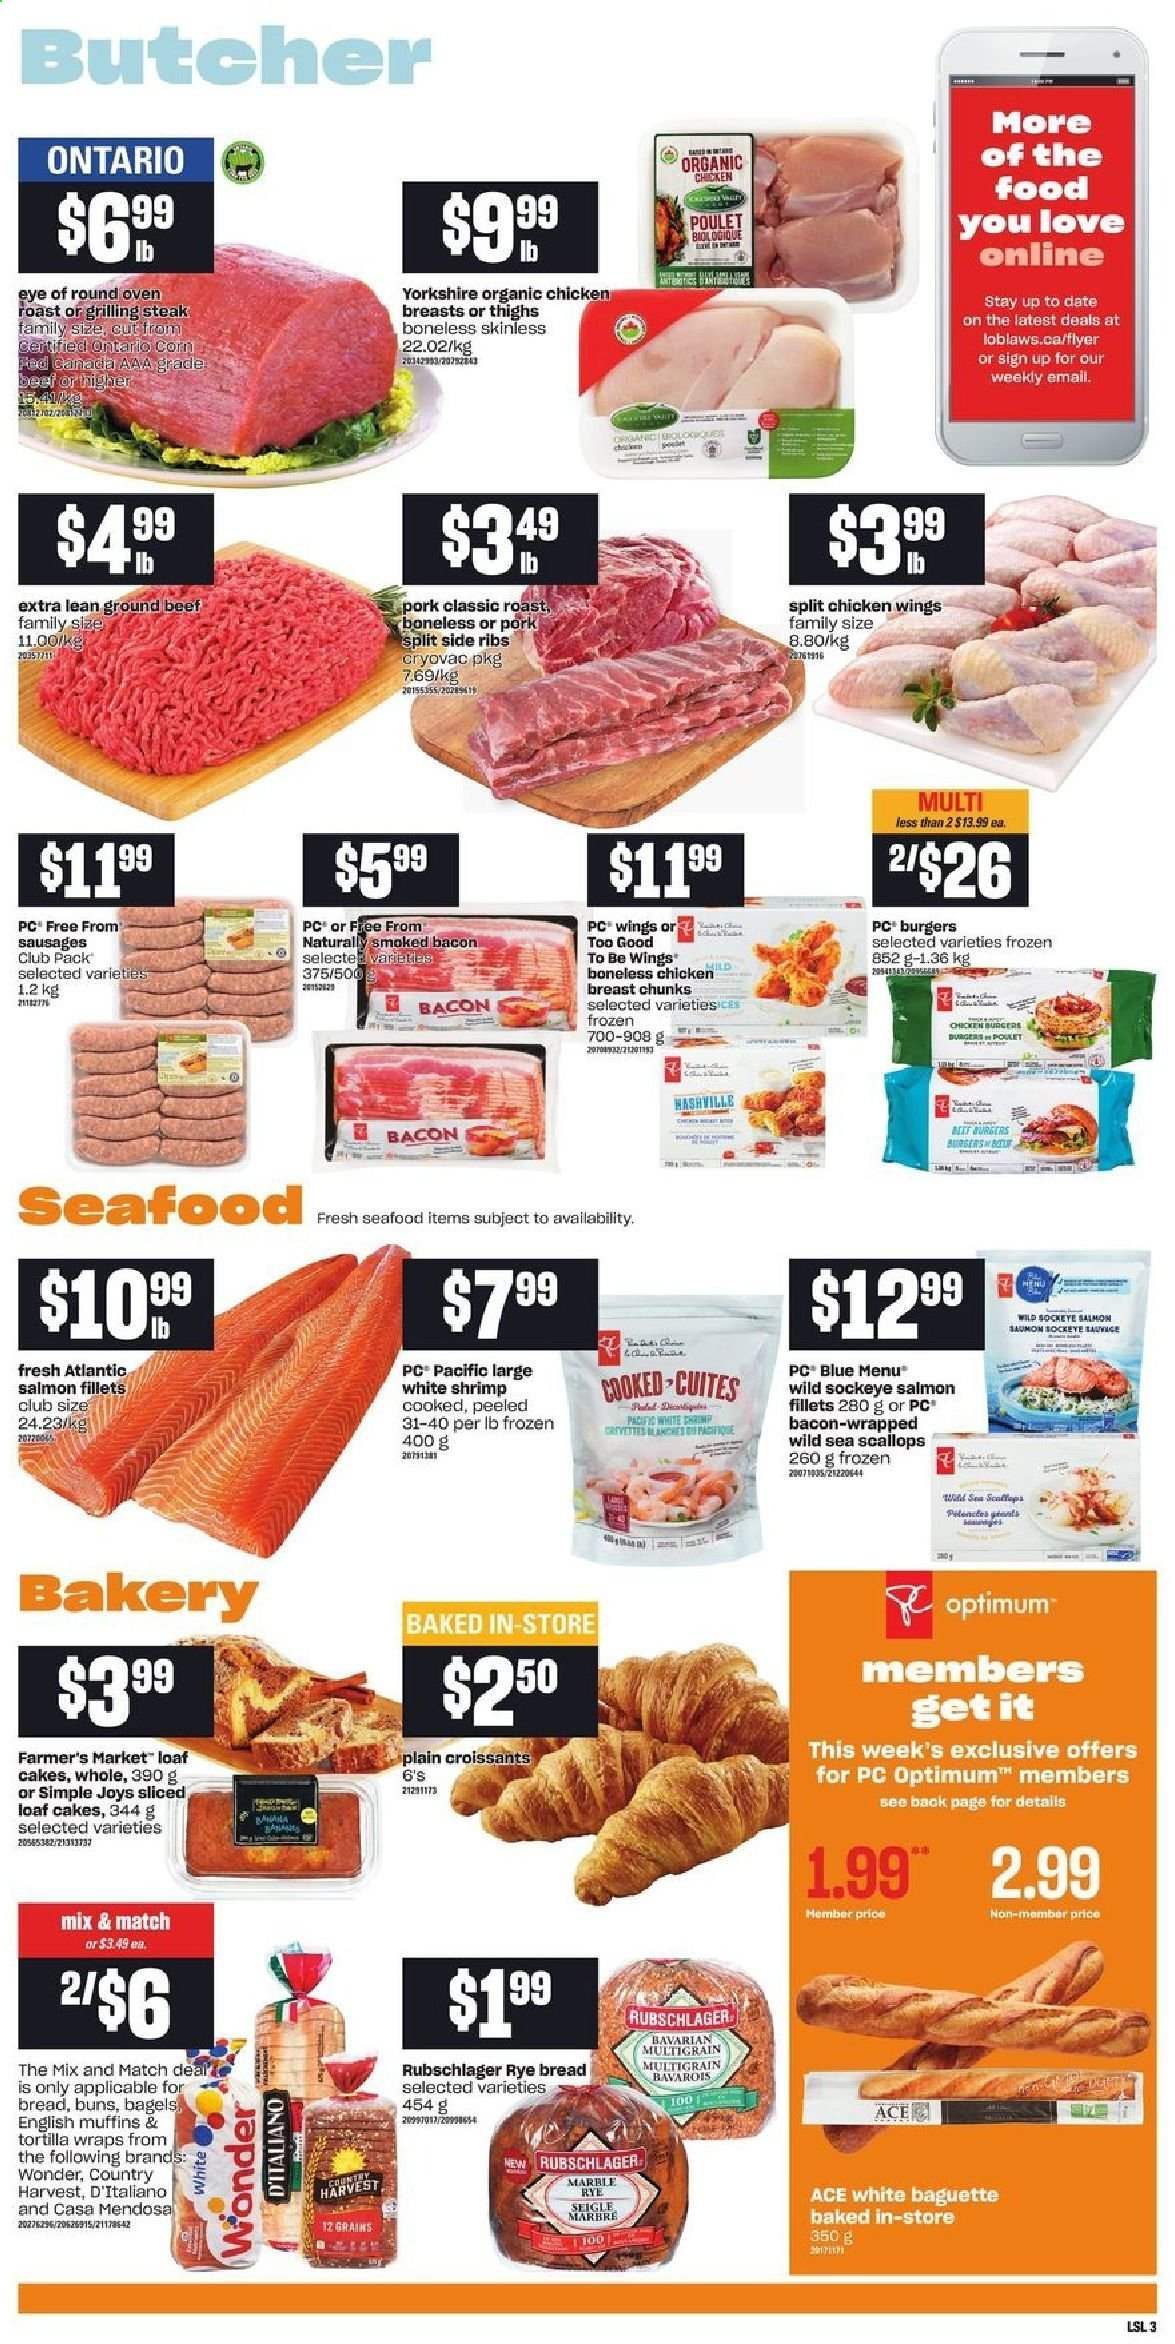 thumbnail - Loblaws Flyer - February 25, 2021 - March 03, 2021 - Sales products - bagels, english muffins, tortillas, cake, croissant, buns, wraps, salmon, salmon fillet, scallops, seafood, shrimps, hamburger, bacon, sausage, Country Harvest, chicken wings, chicken breasts, chicken, beef meat, ground beef, eye of round, Optimum, steak. Page 4.